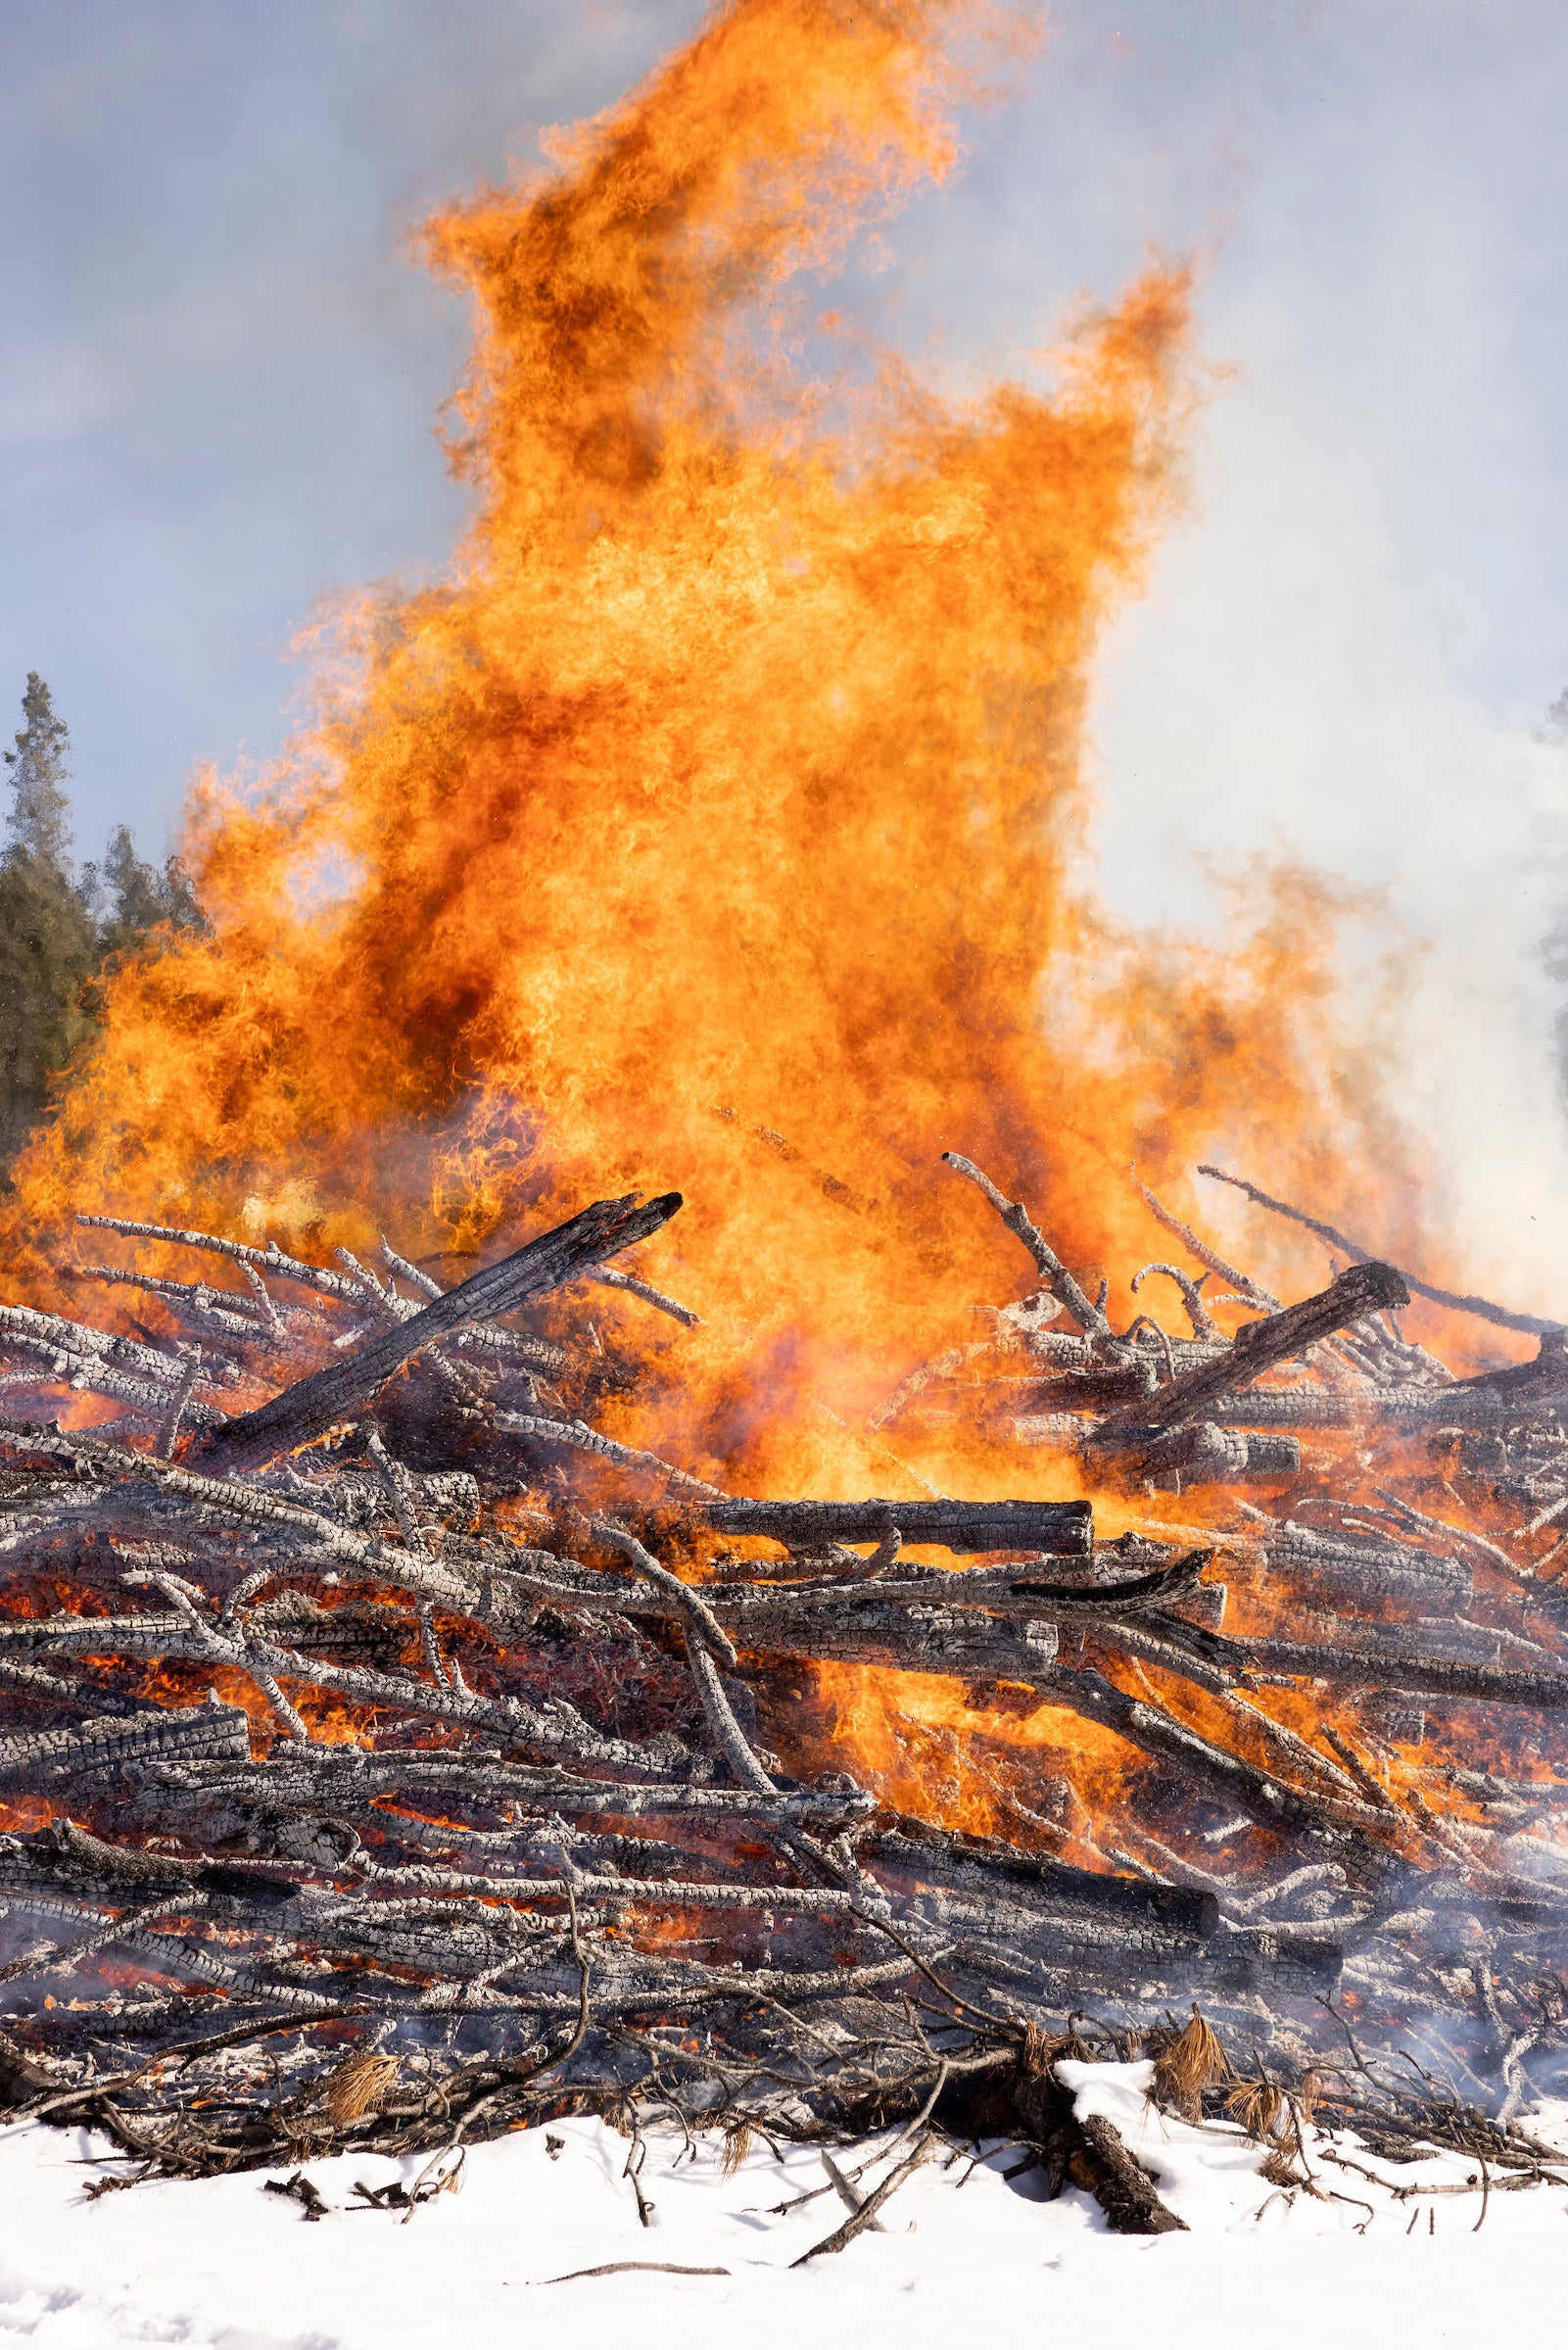 A closely cropped photo of a flame reaching up into the sky with bright yellows and deep oranges as it turns the wood pile below into white and gray charcoal